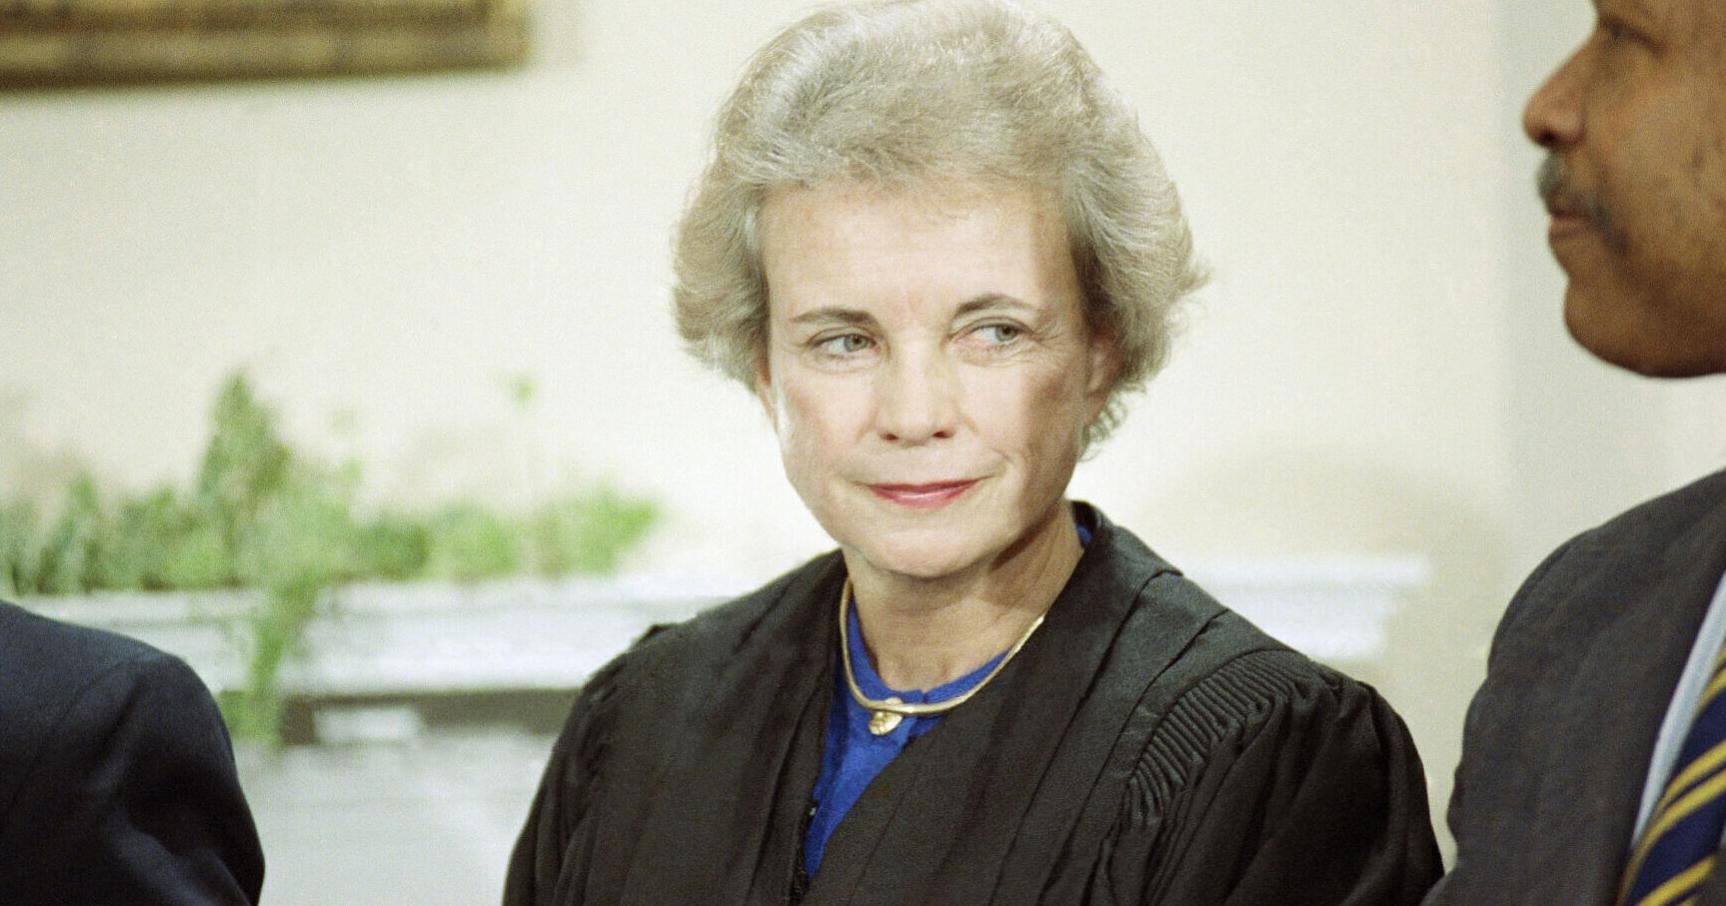 Sandra Day O'Connor, the first woman on the Supreme Court, has died at age 93